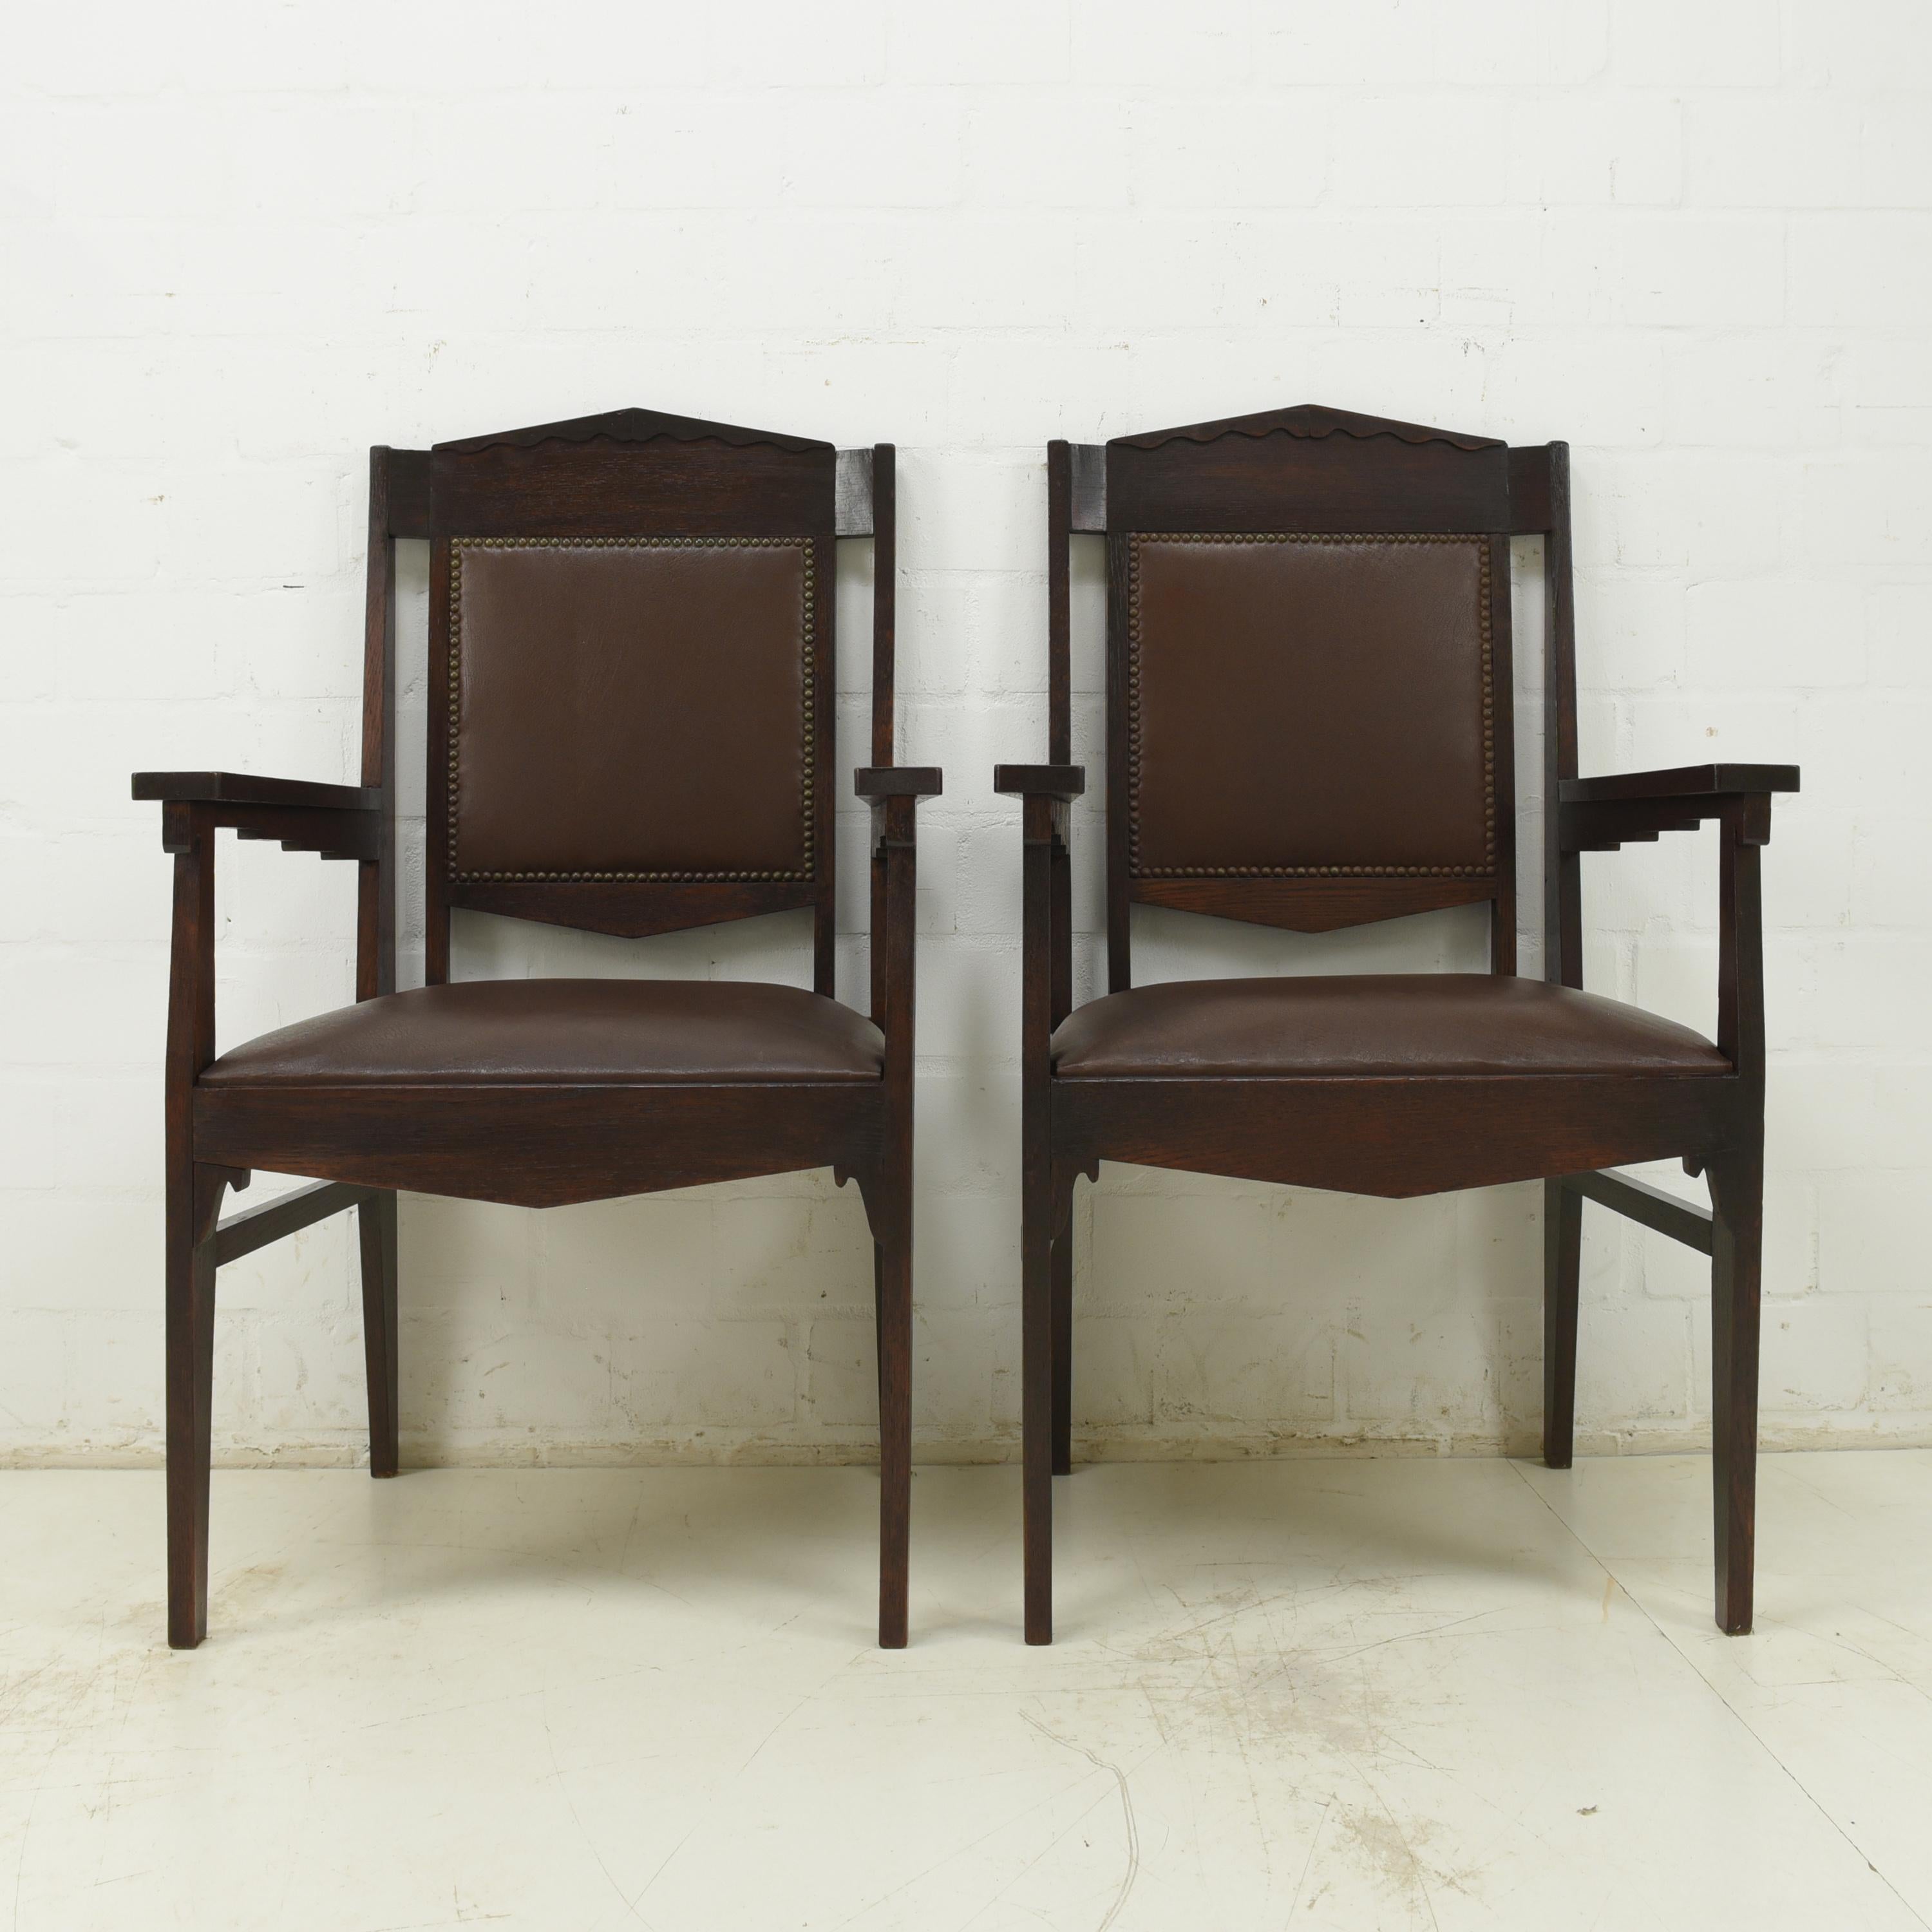 Pair of Armchairs Art Deco Solid Oak armchair desk chairs, 1925

Features:
Stable & comfortable
Faux leather upholstery like new
Geometric art deco design
Beautiful patina

Additional information:
Material: Solid oak
Dimensions: 60 W x